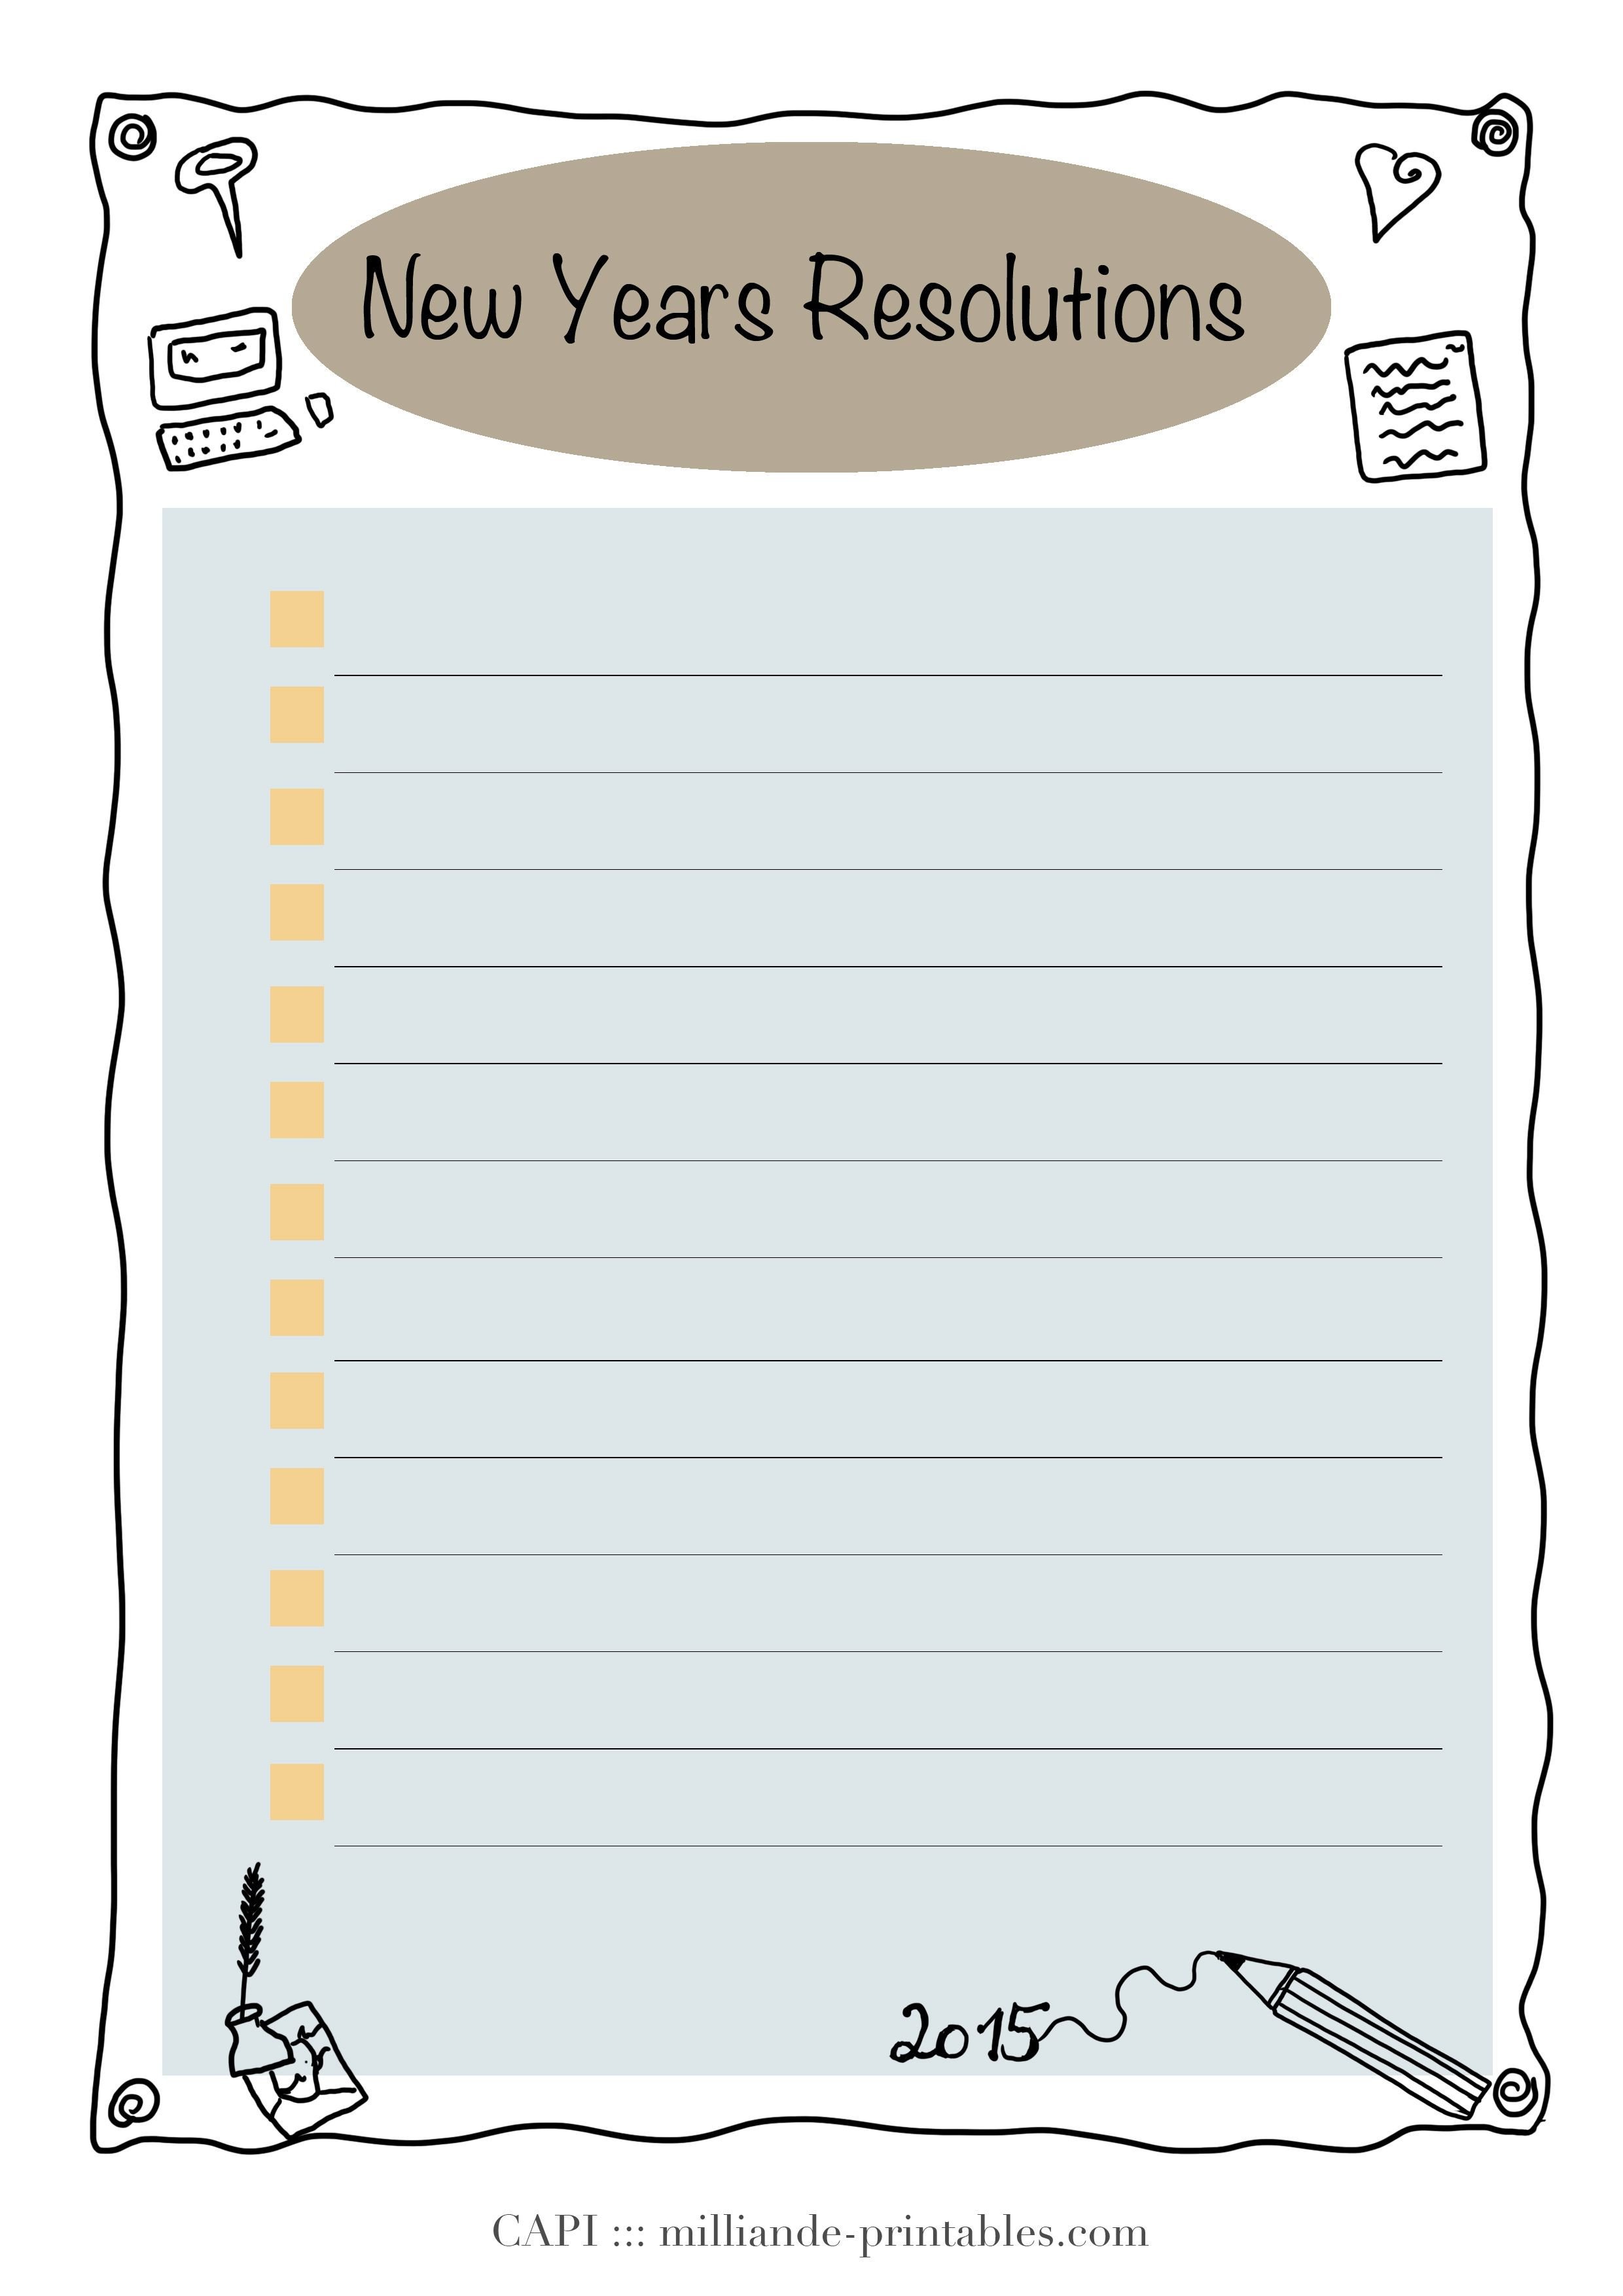 A simple Tick List New Year resolution card printable